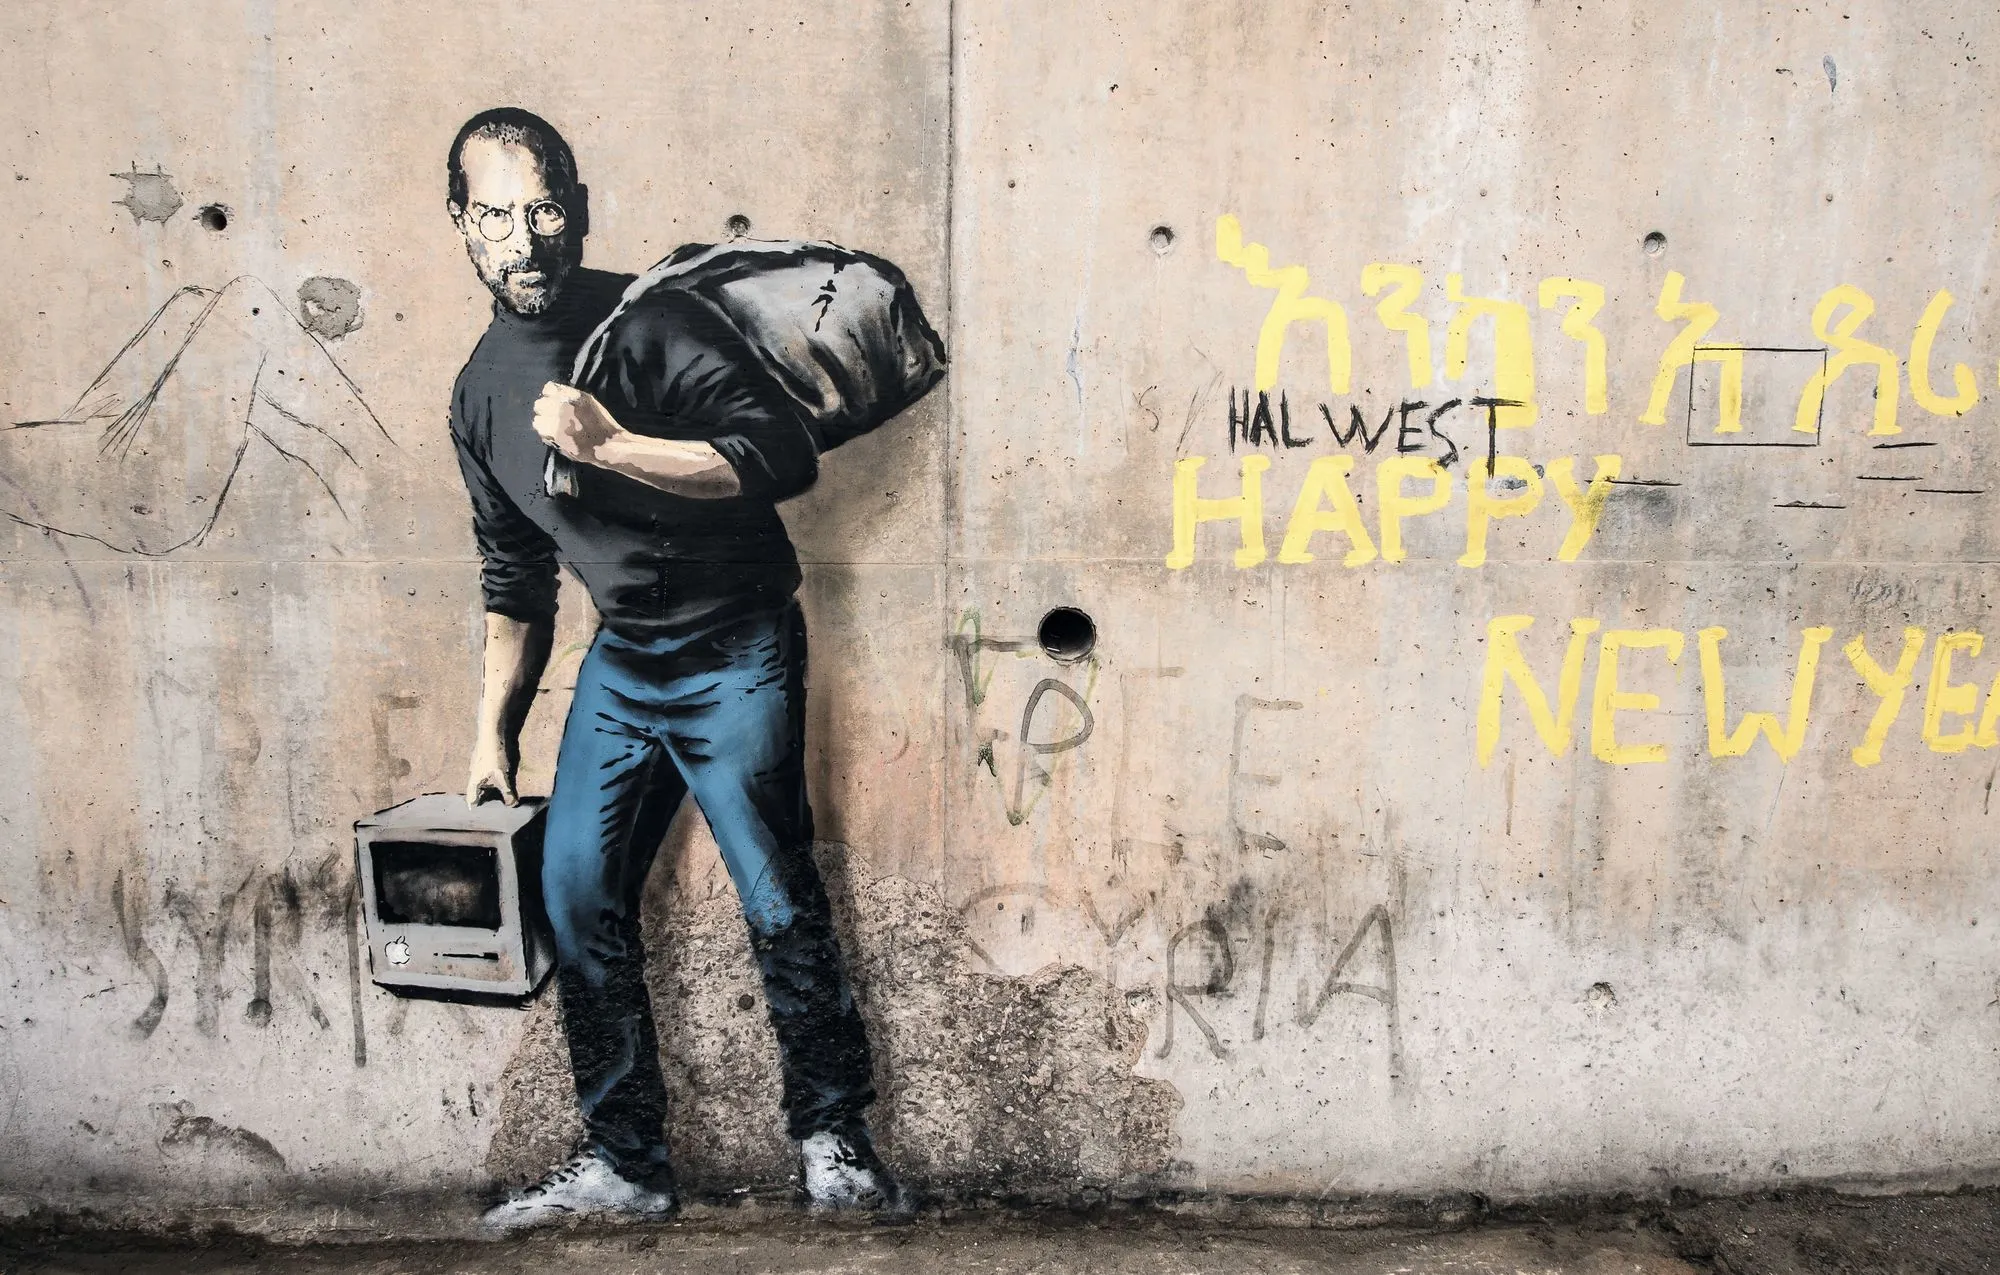 A mural by Banksy in Calais